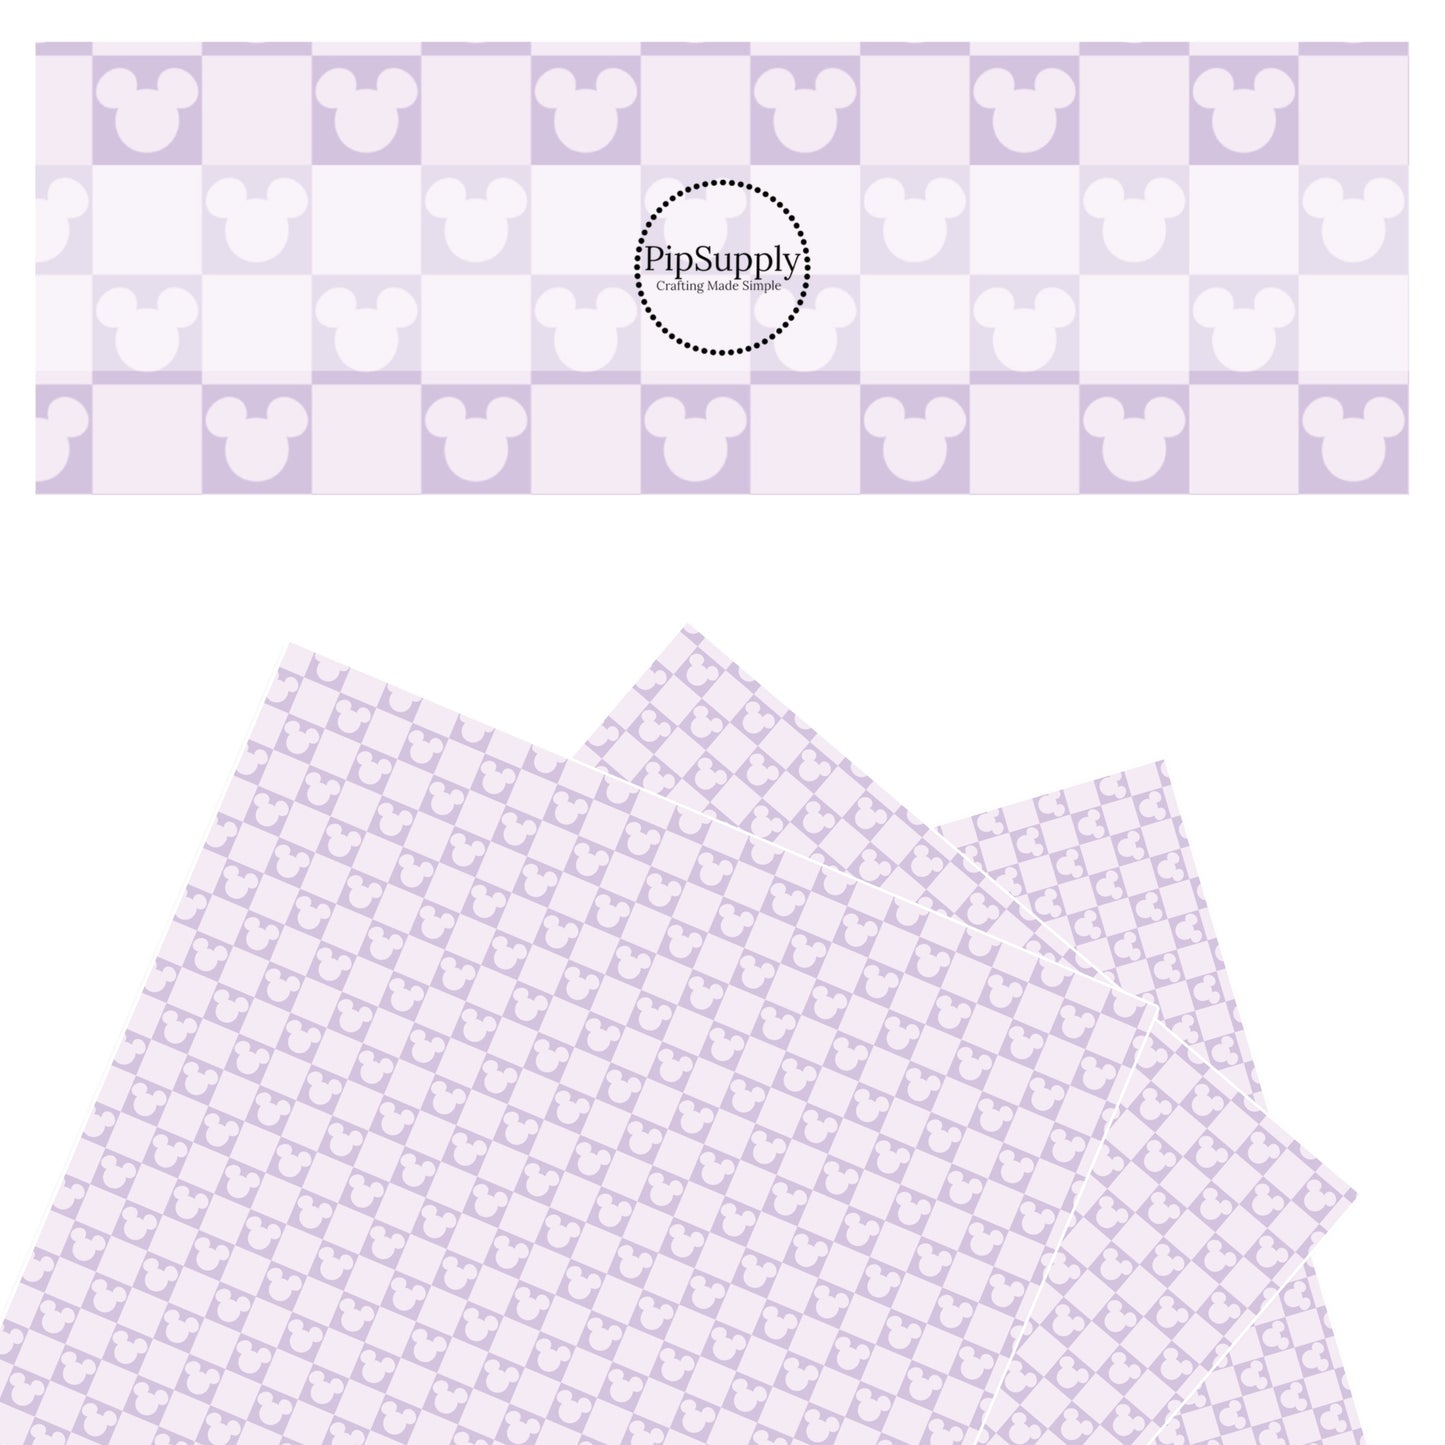 Checkered mouse lavender faux leather sheet